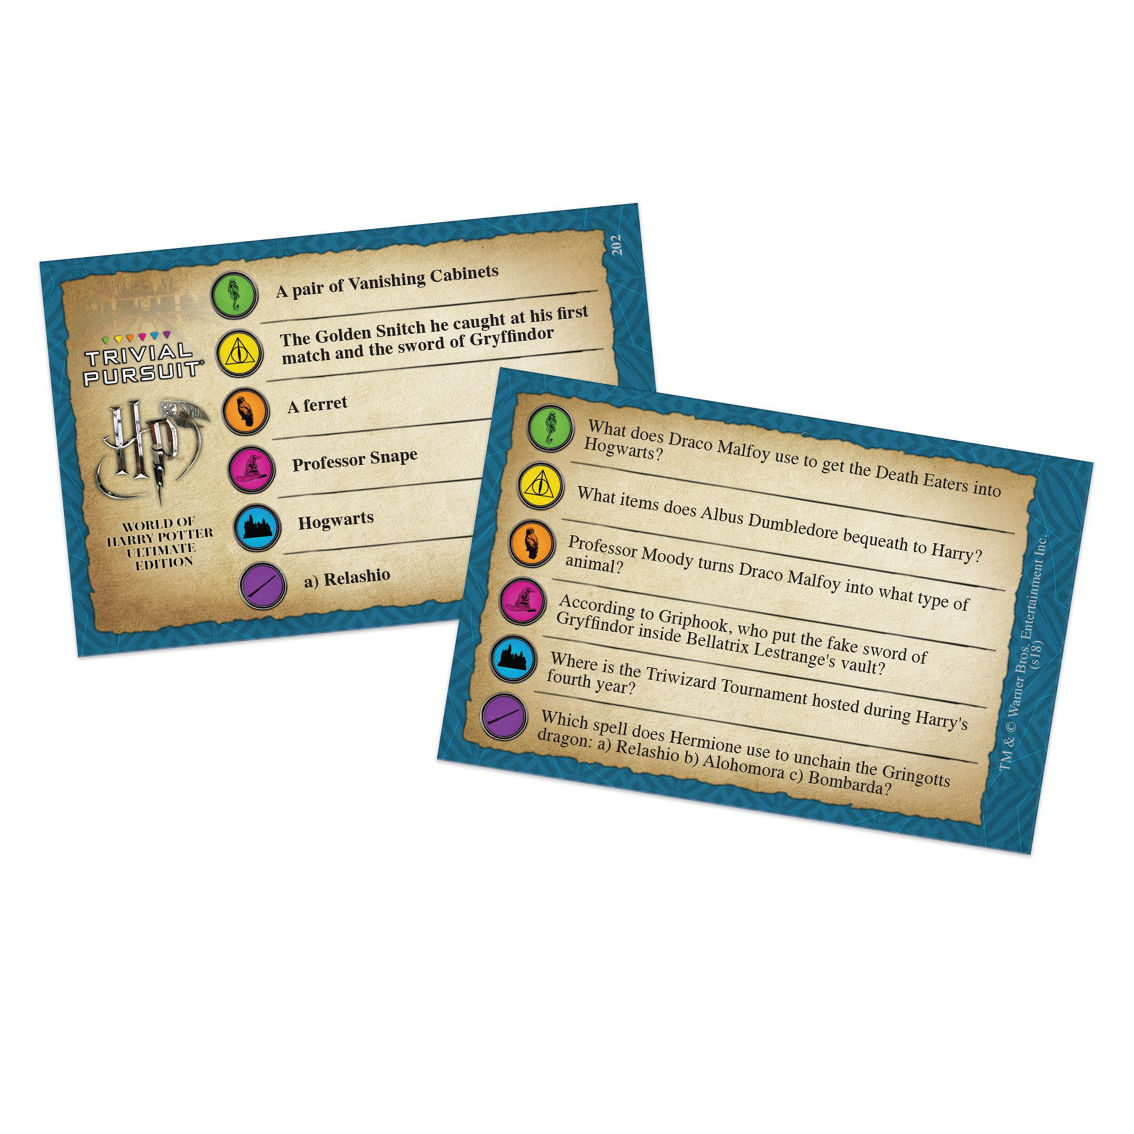 USAopoly Trivial Pursuit - World of Harry Potter Ultimate Edition - Image 4 of 5